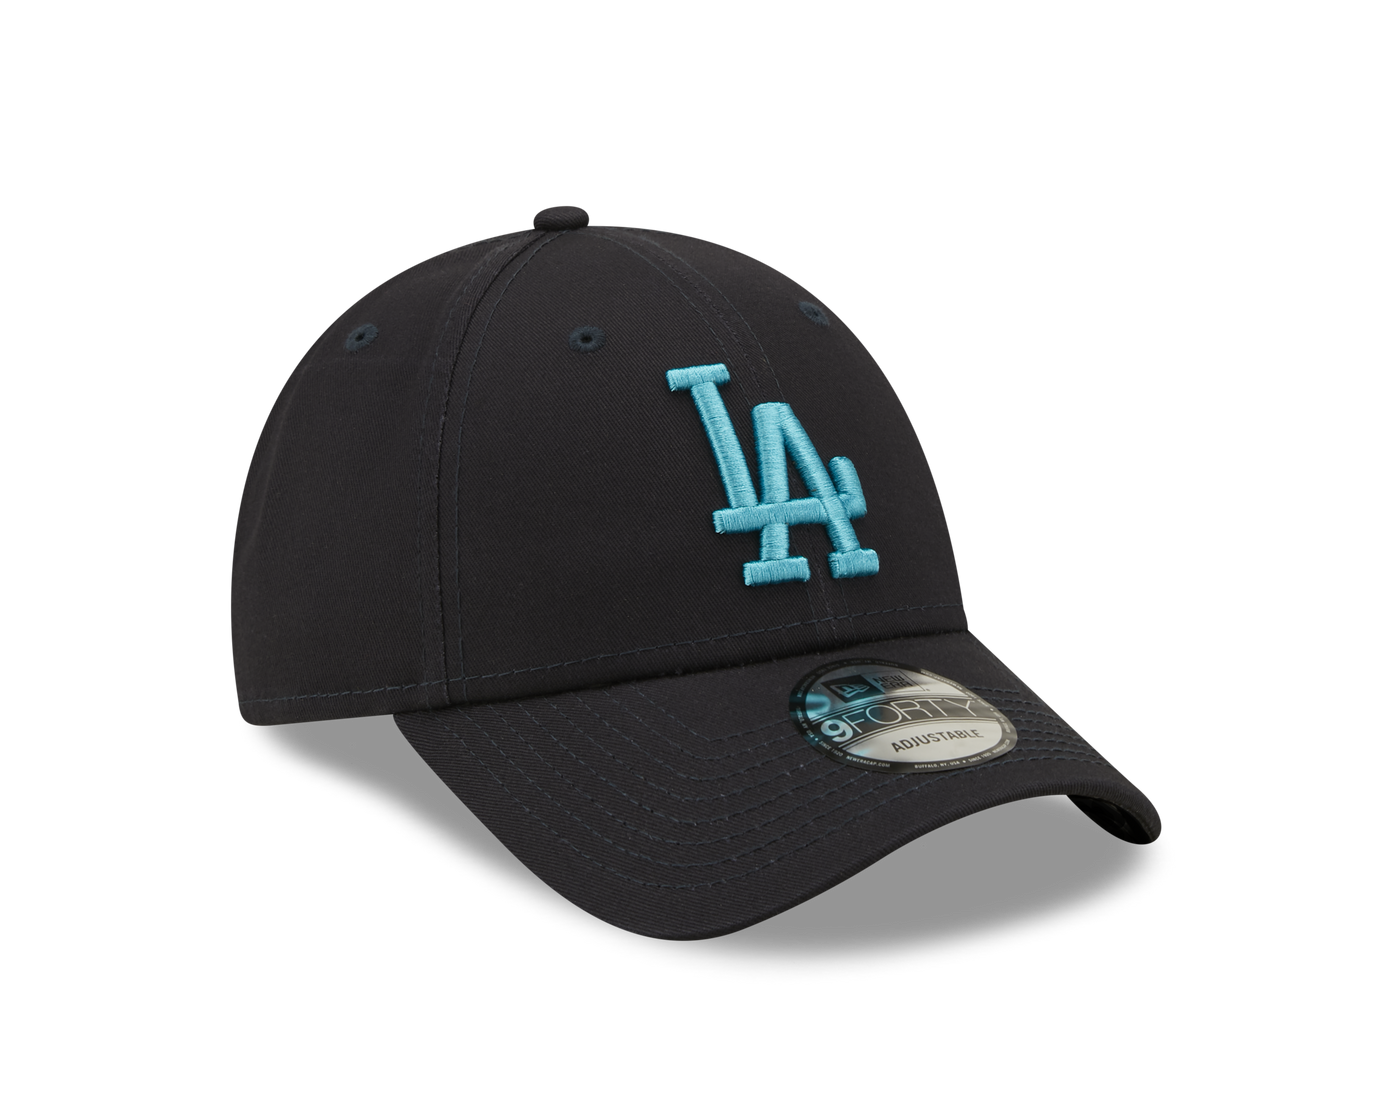 LOS ANGELES DODGERS LEAGUE ESSENTIAL 9FORTY BLACK 9FORTY CAP